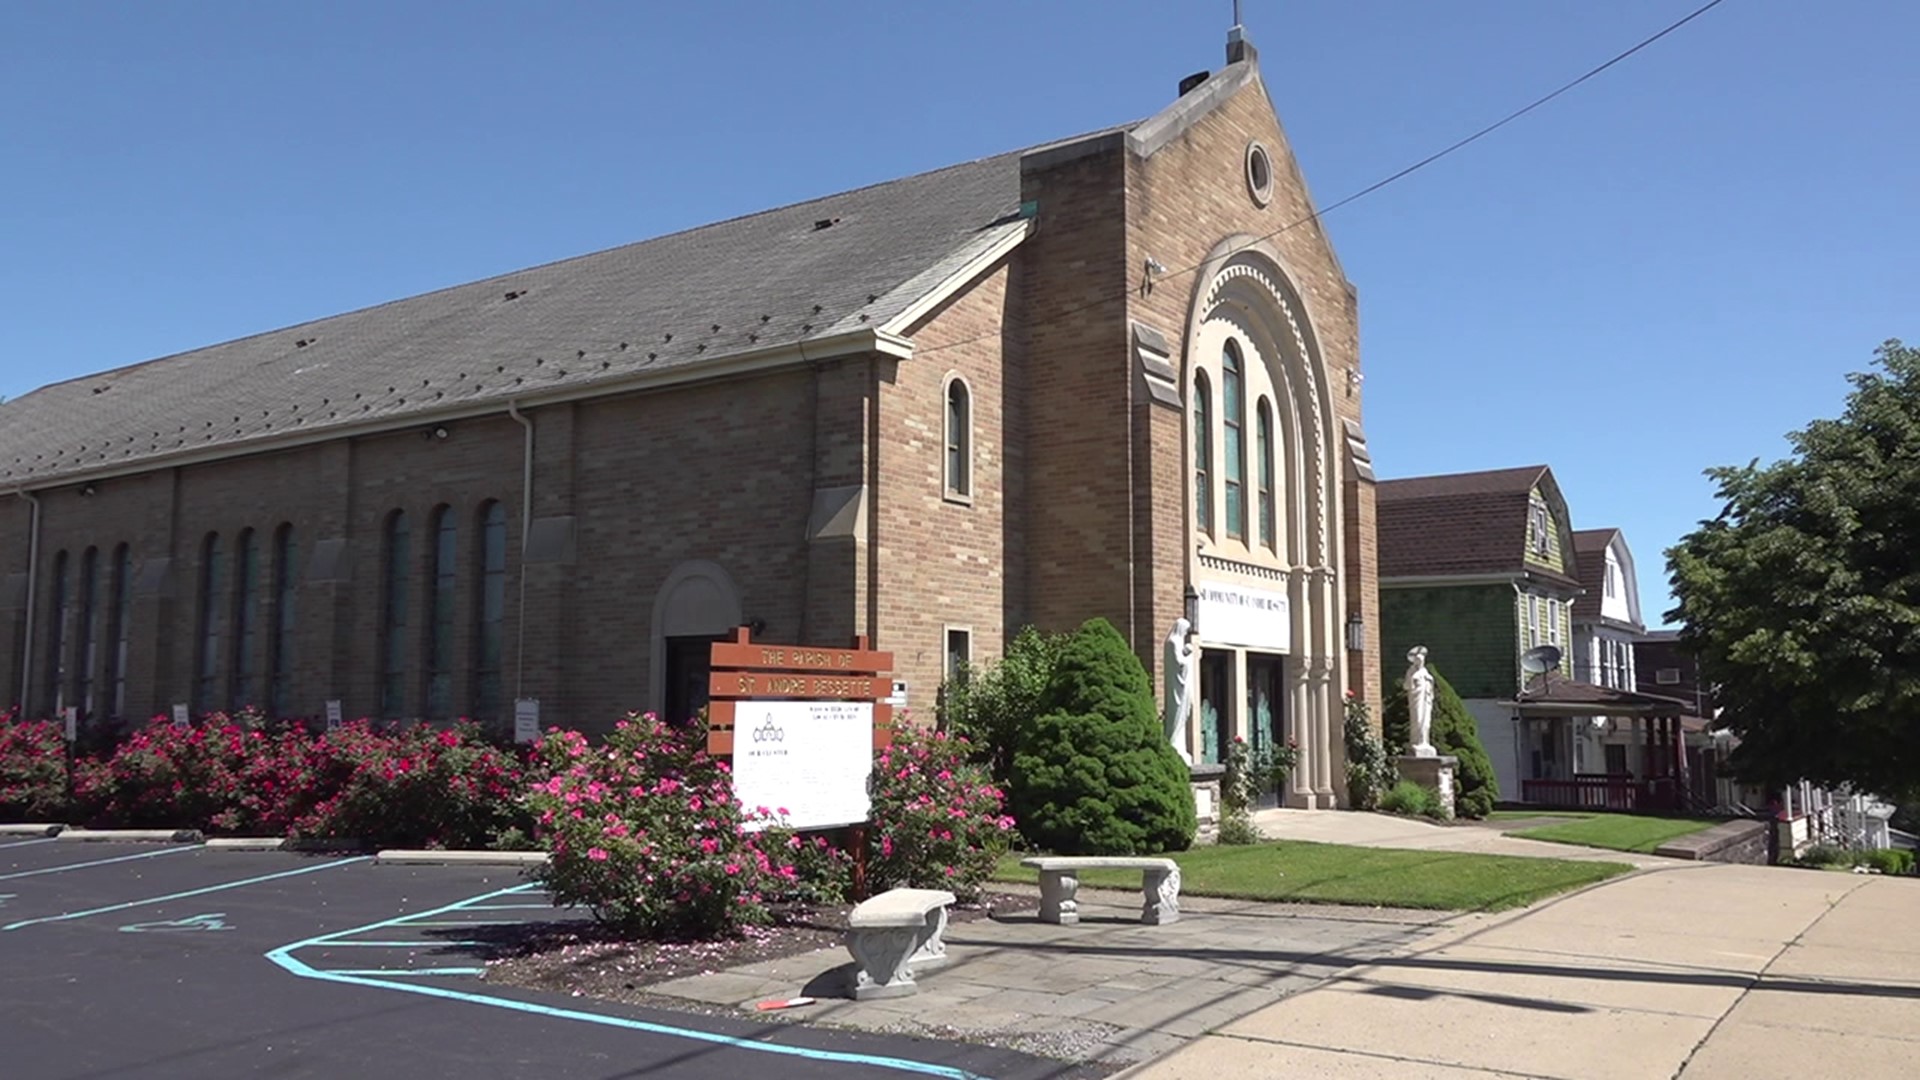 Only a handful of Roman Catholic churches remain in Wilkes-Barre and two of them are set to close this month.